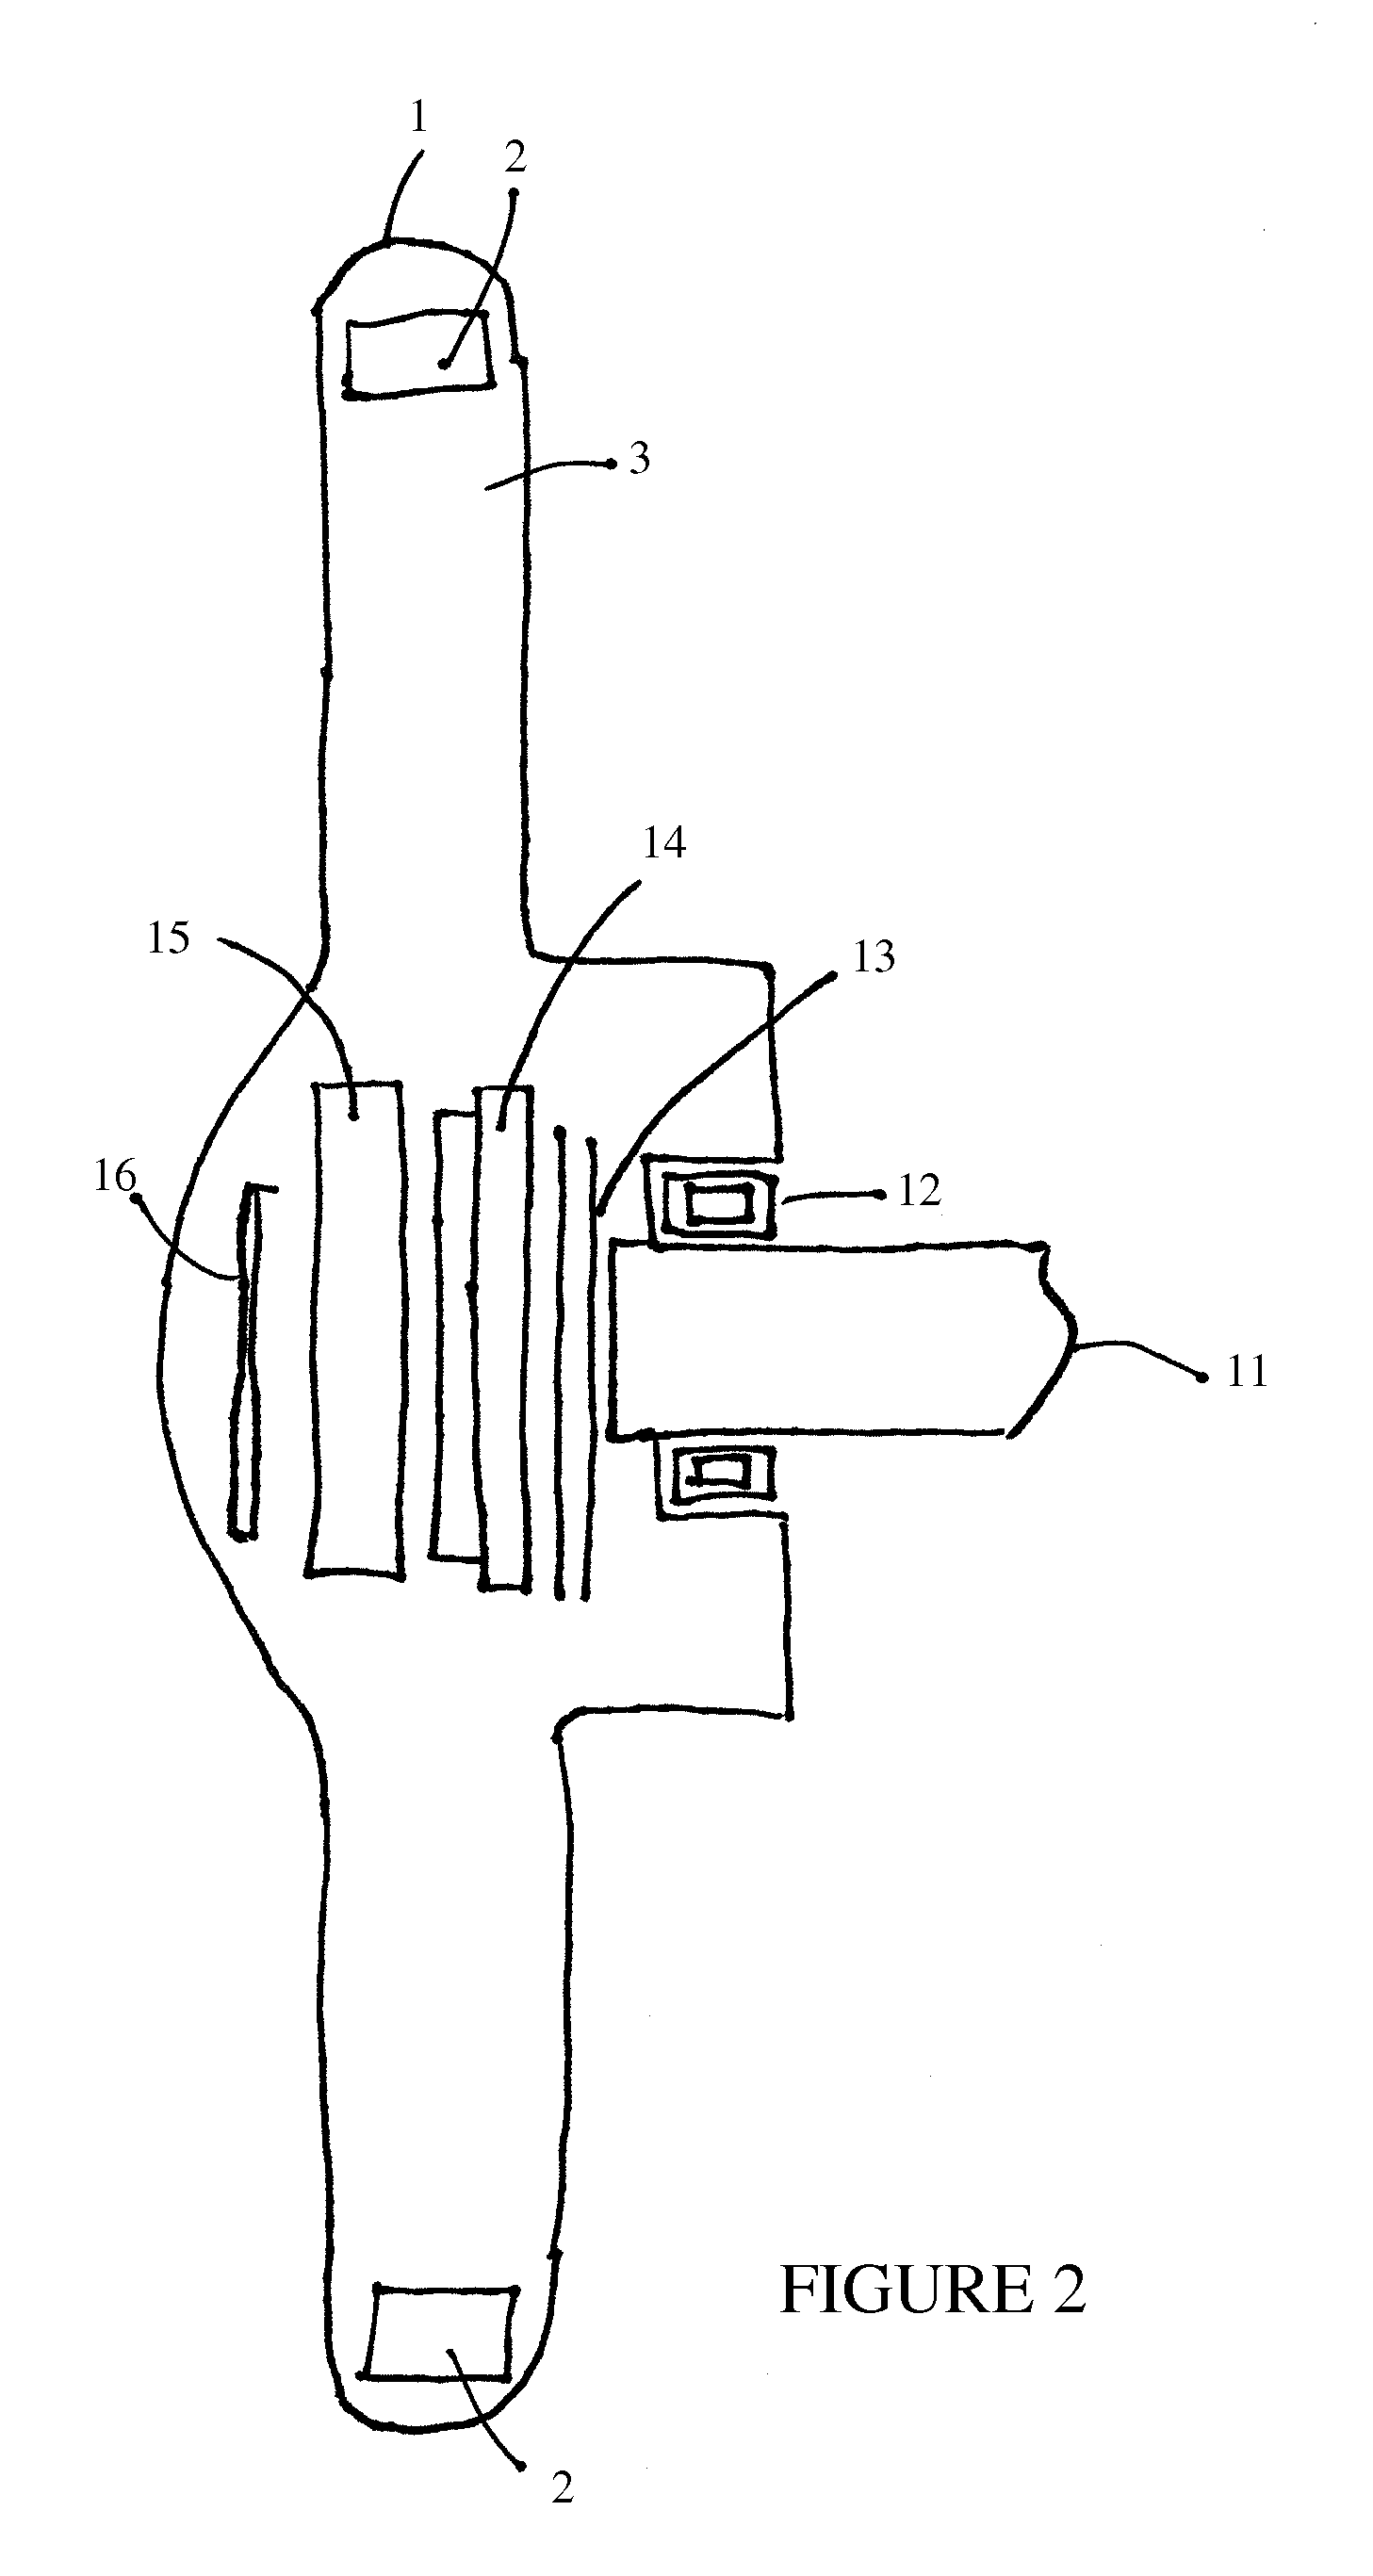 Driver drowsiness detection and verification system and method